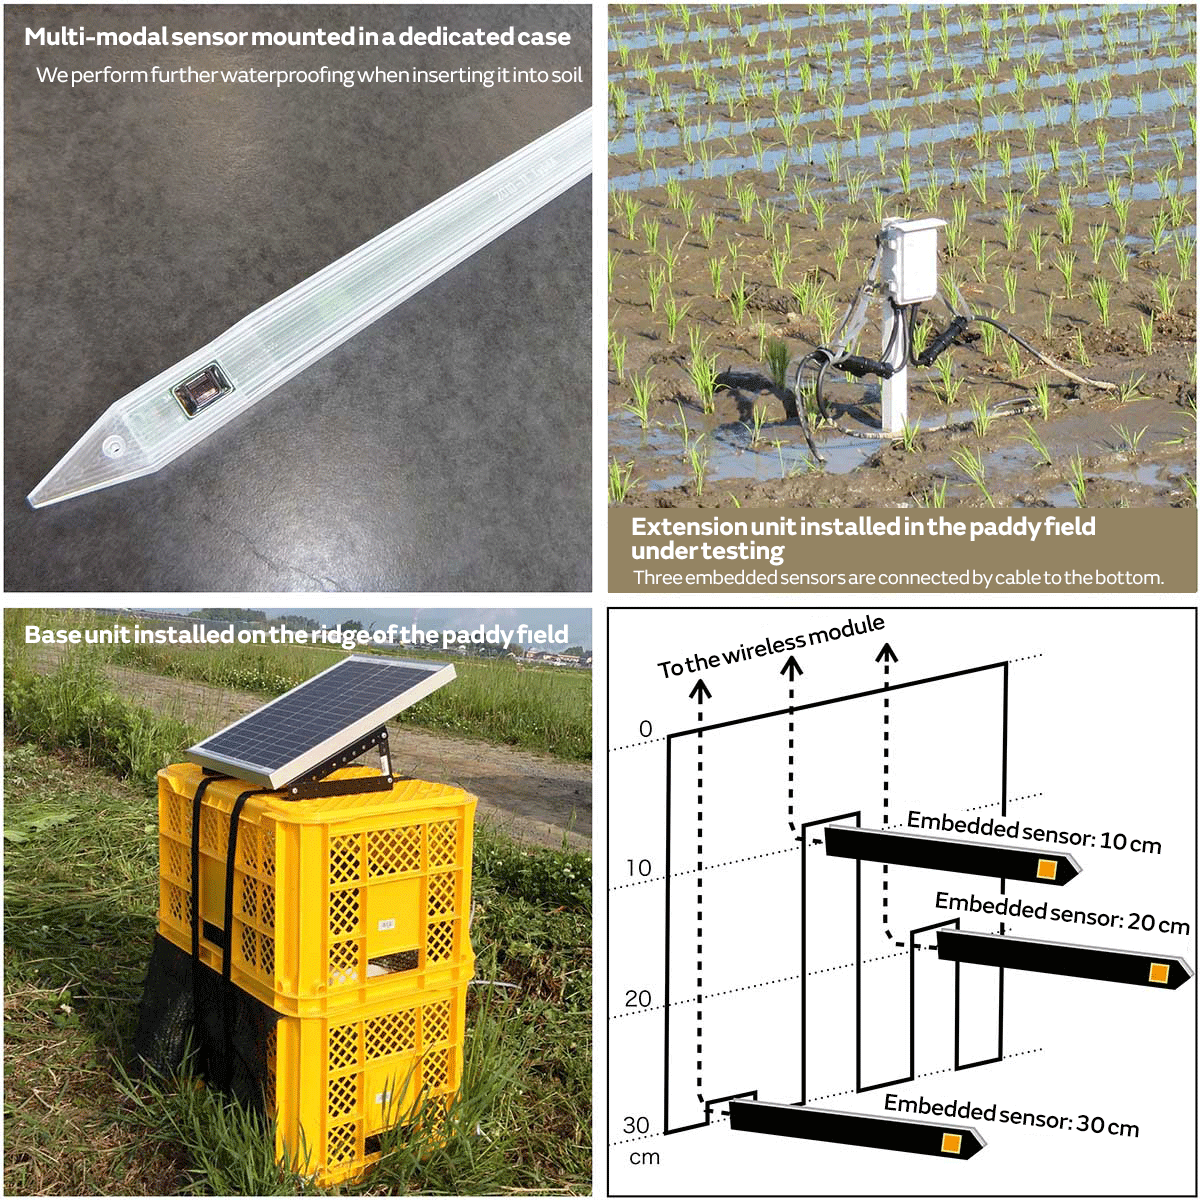 Image of Wireless environmental monitoring system that collects data wirelessly from the soil sensors